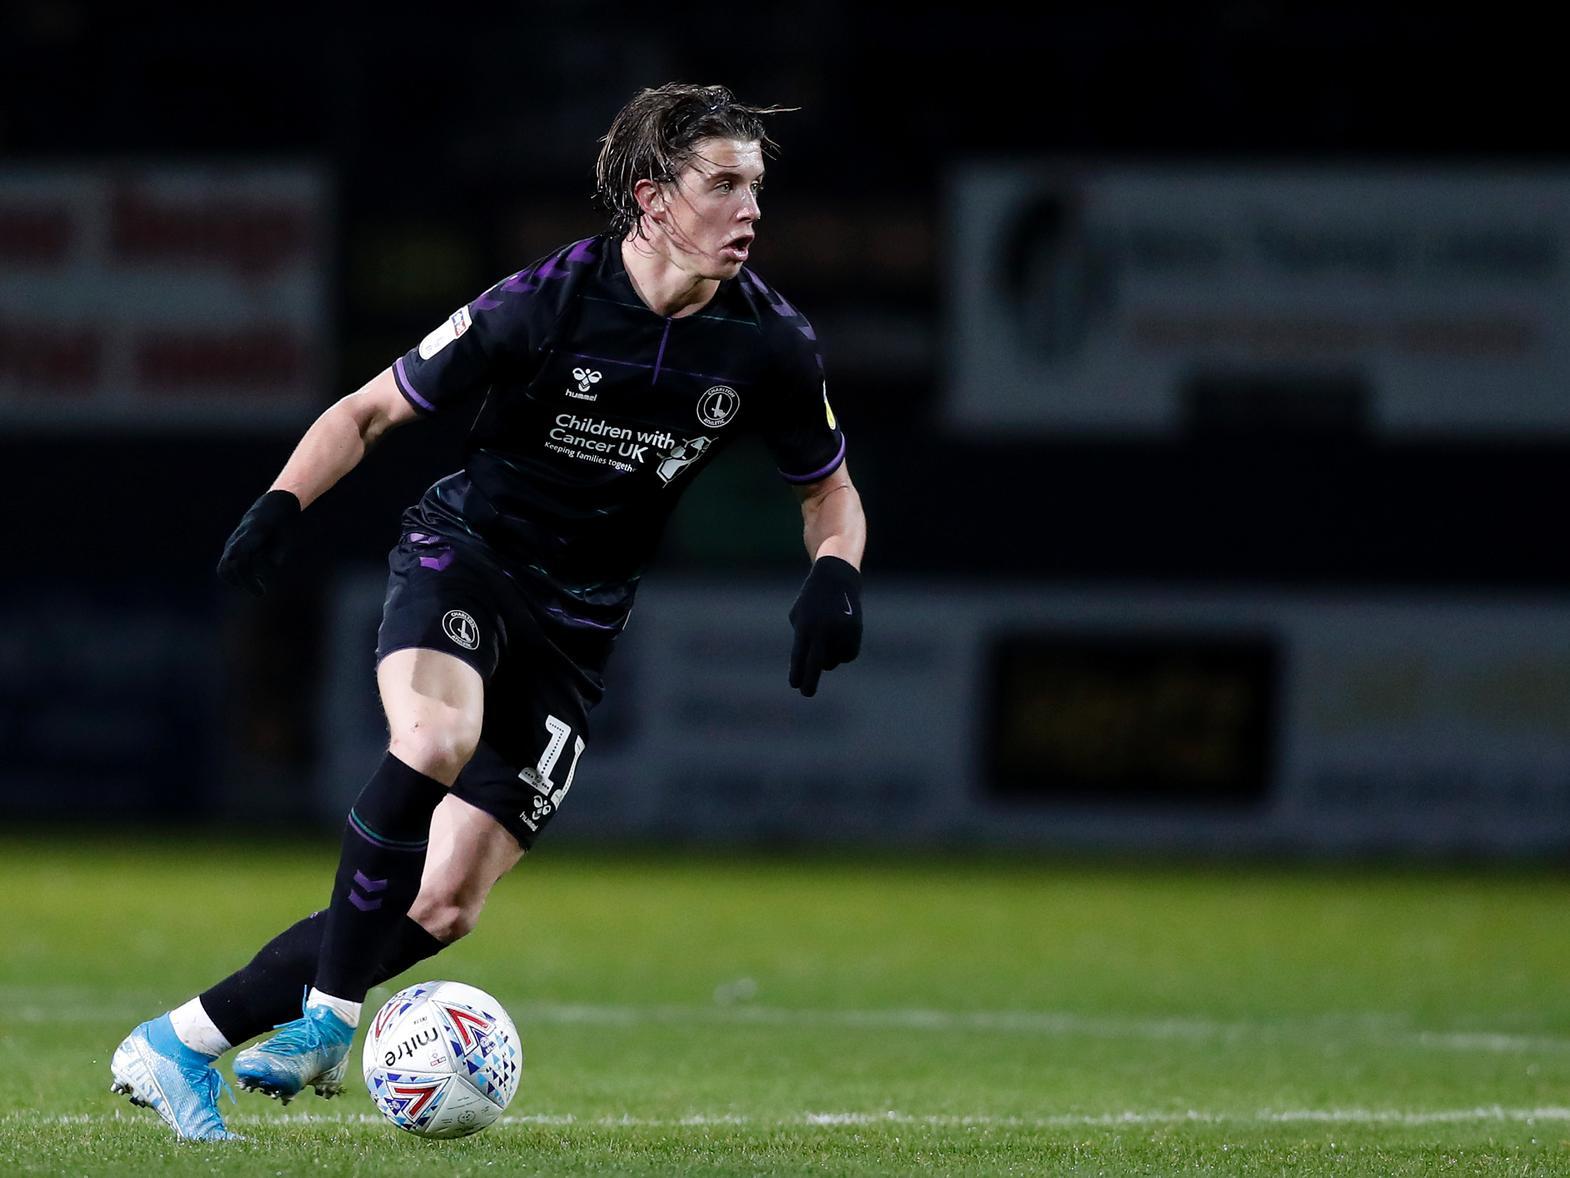 Several clubs have been after the youngster for the remainder of the 2019/20 season, with Burnley, Norwich, West Bromwich Albion, Millwall and Swansea all interested. The bookies aren't offering odds at the moment.